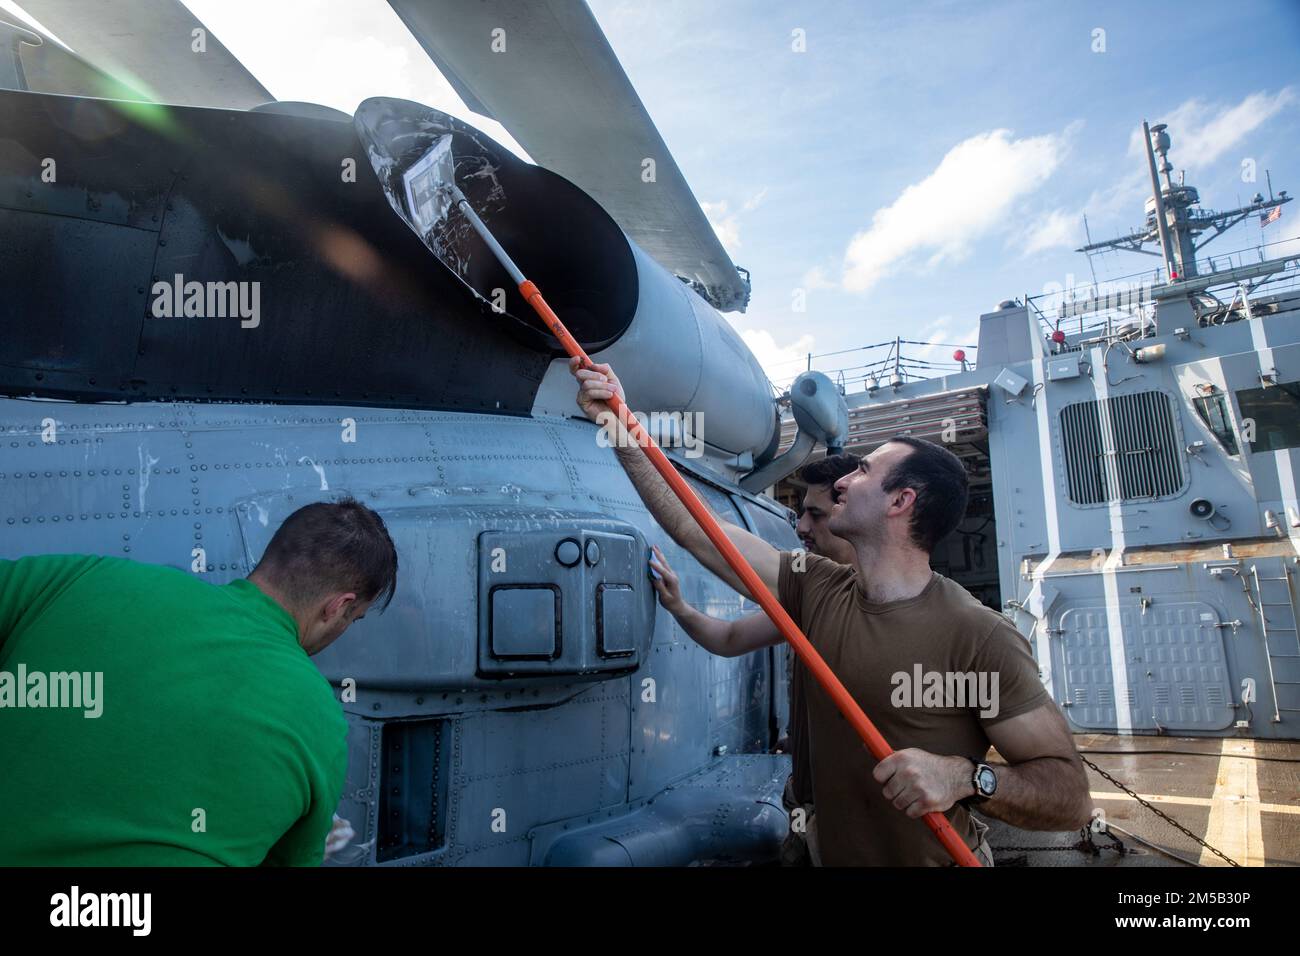 SOUTH CHINA SEA (Feb. 17, 2022) Sailors scrub down an MH-60R helicopter aboard Arleigh Burke-class guided-missile destroyer USS Ralph Johnson (DDG 114). Ralph Johnson is assigned to Task Force 71/Destroyer Squadron (DESRON) 15, the Navy’s largest forward-deployed DESRON and the U.S. 7th fleet’s principal surface force. Stock Photo